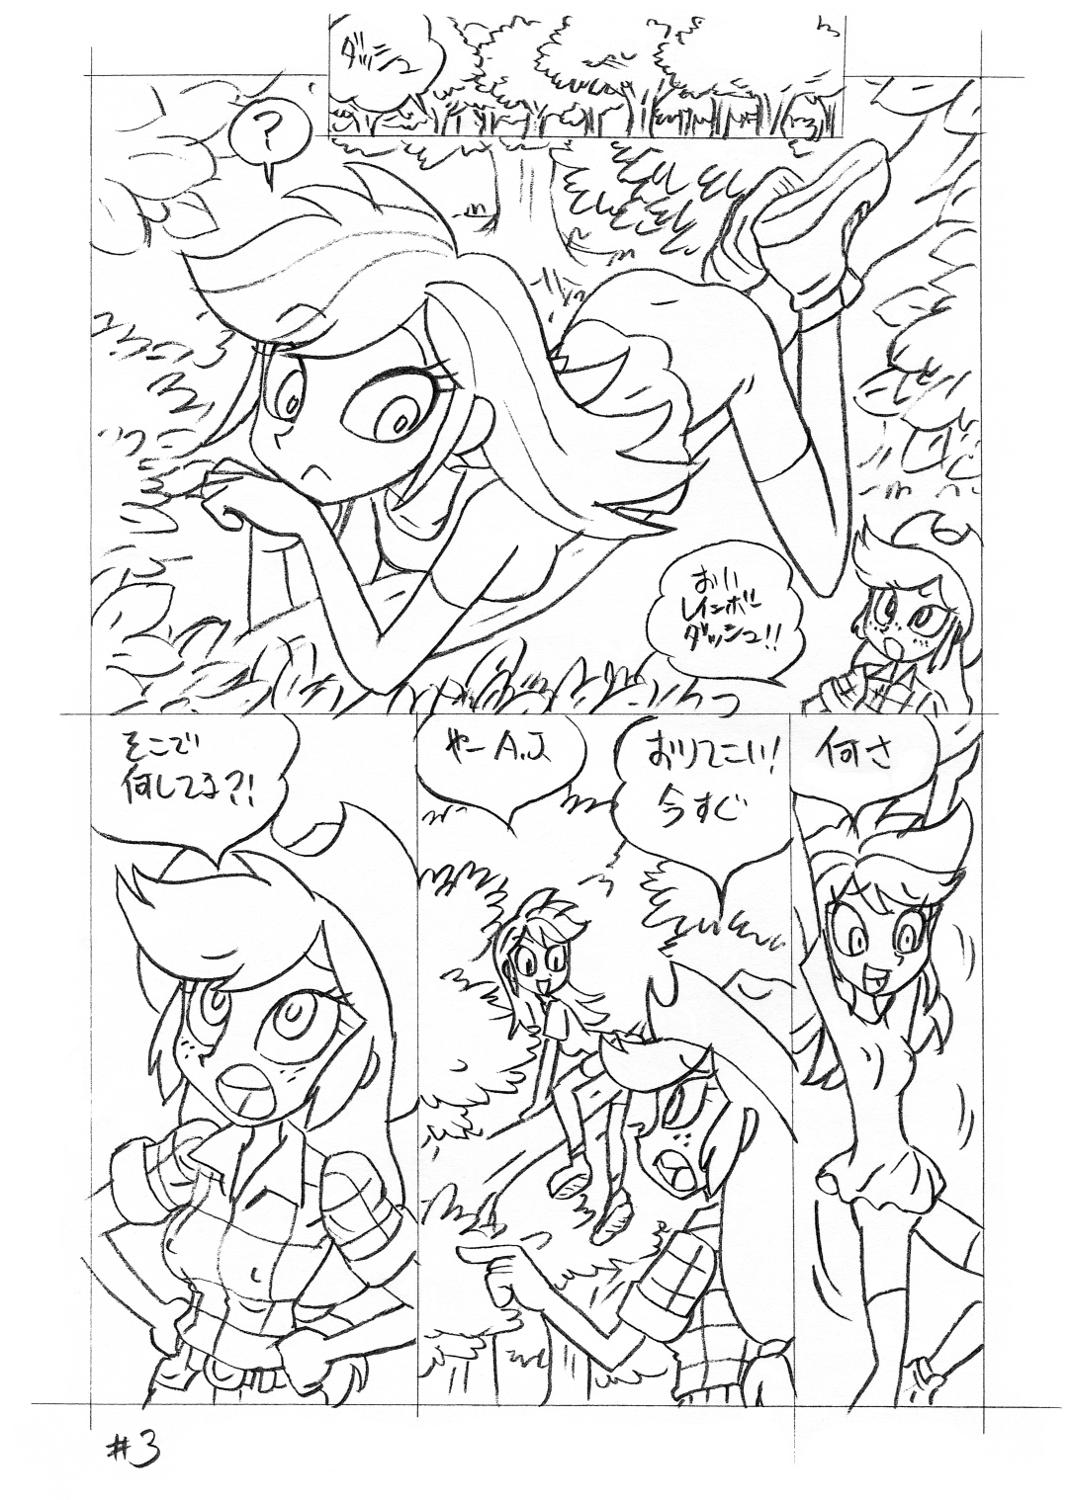 Amateurs Psychosomatic Counterfeit EX- A.J. in E.G. Style - My little pony friendship is magic Bigbutt - Page 2